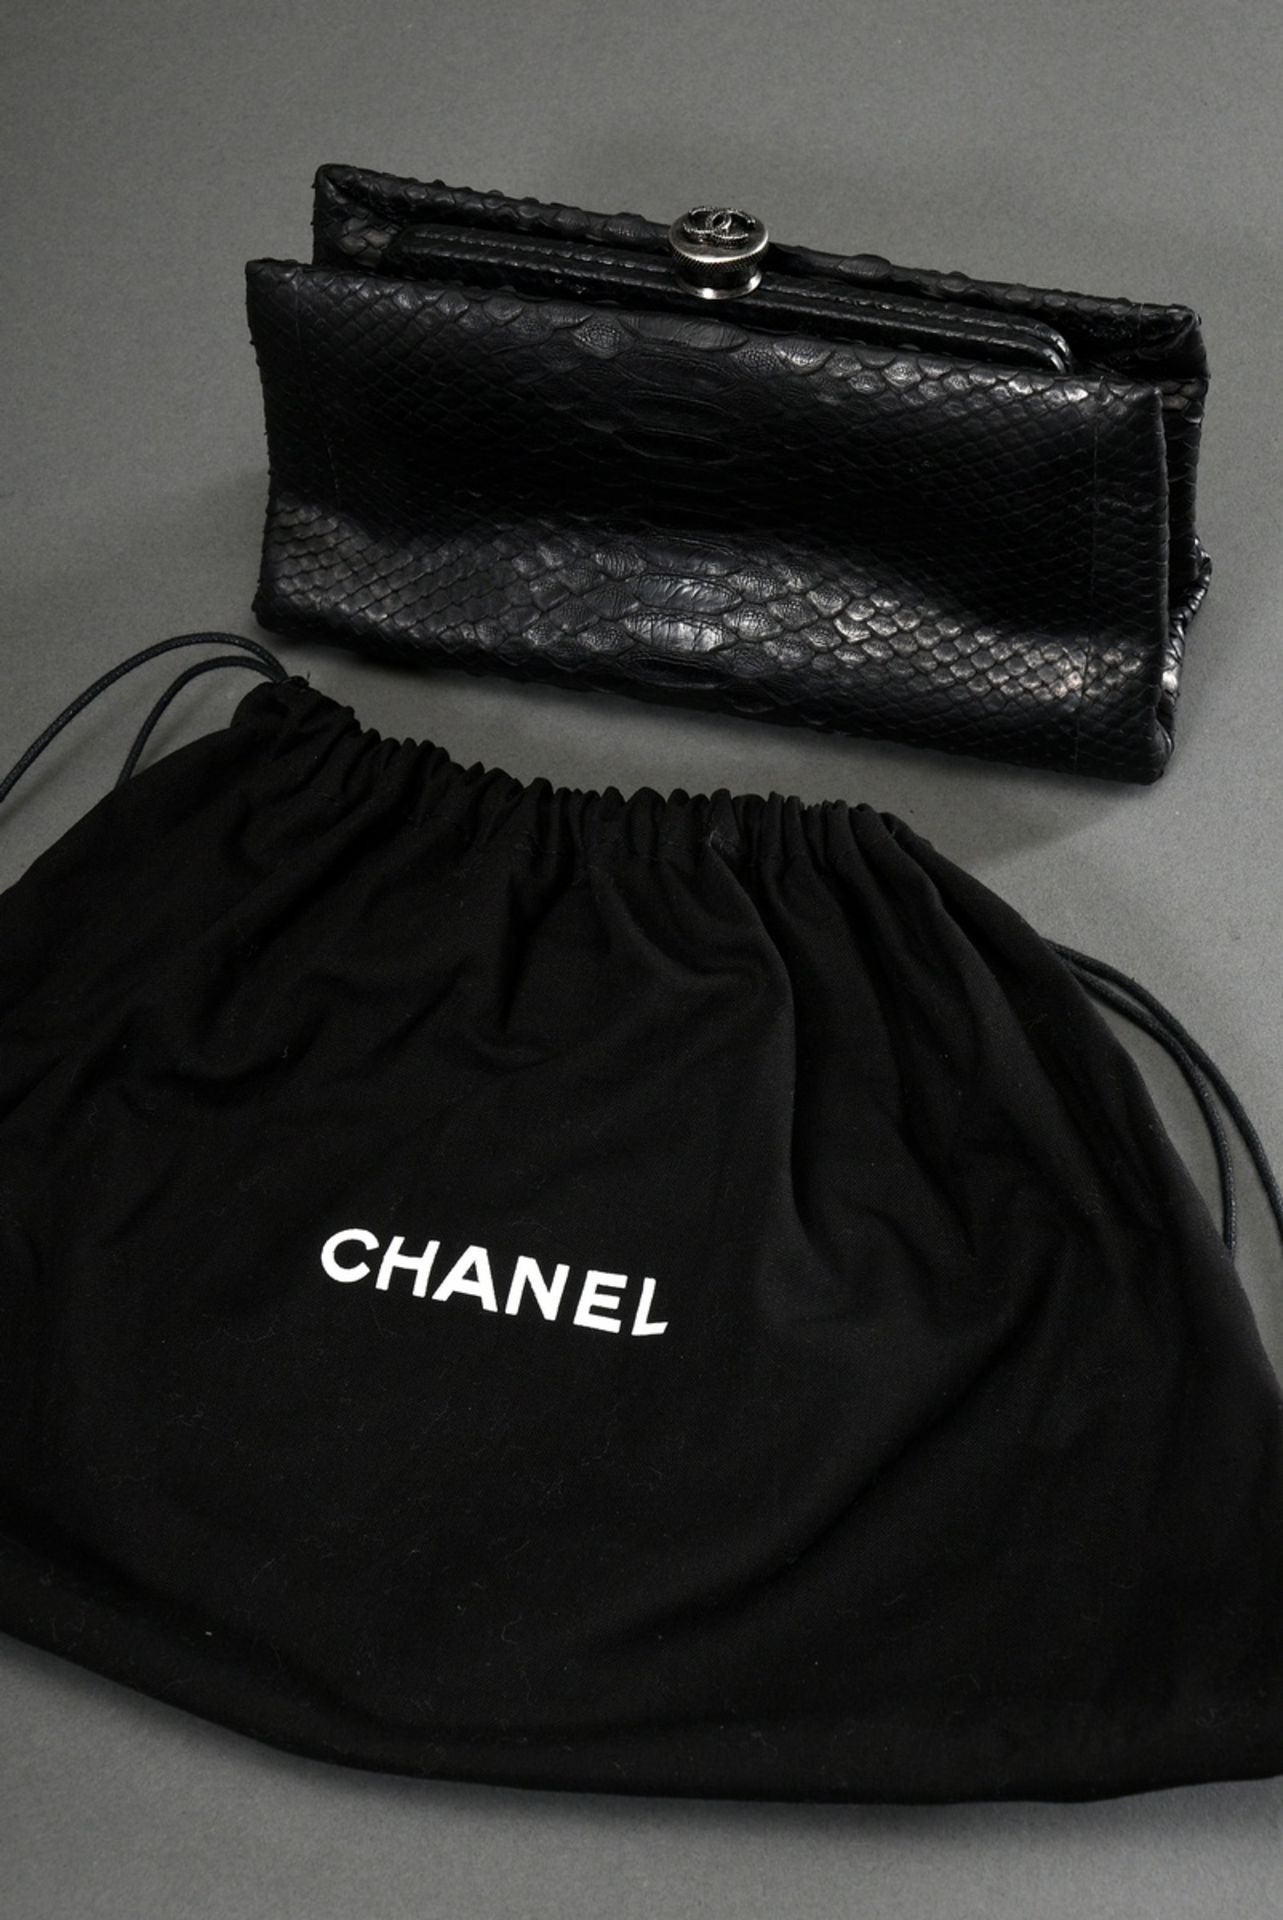 Chanel clutch in black python leather with silver metal logo clasp, black silk lining, Collection 2 - Image 2 of 5